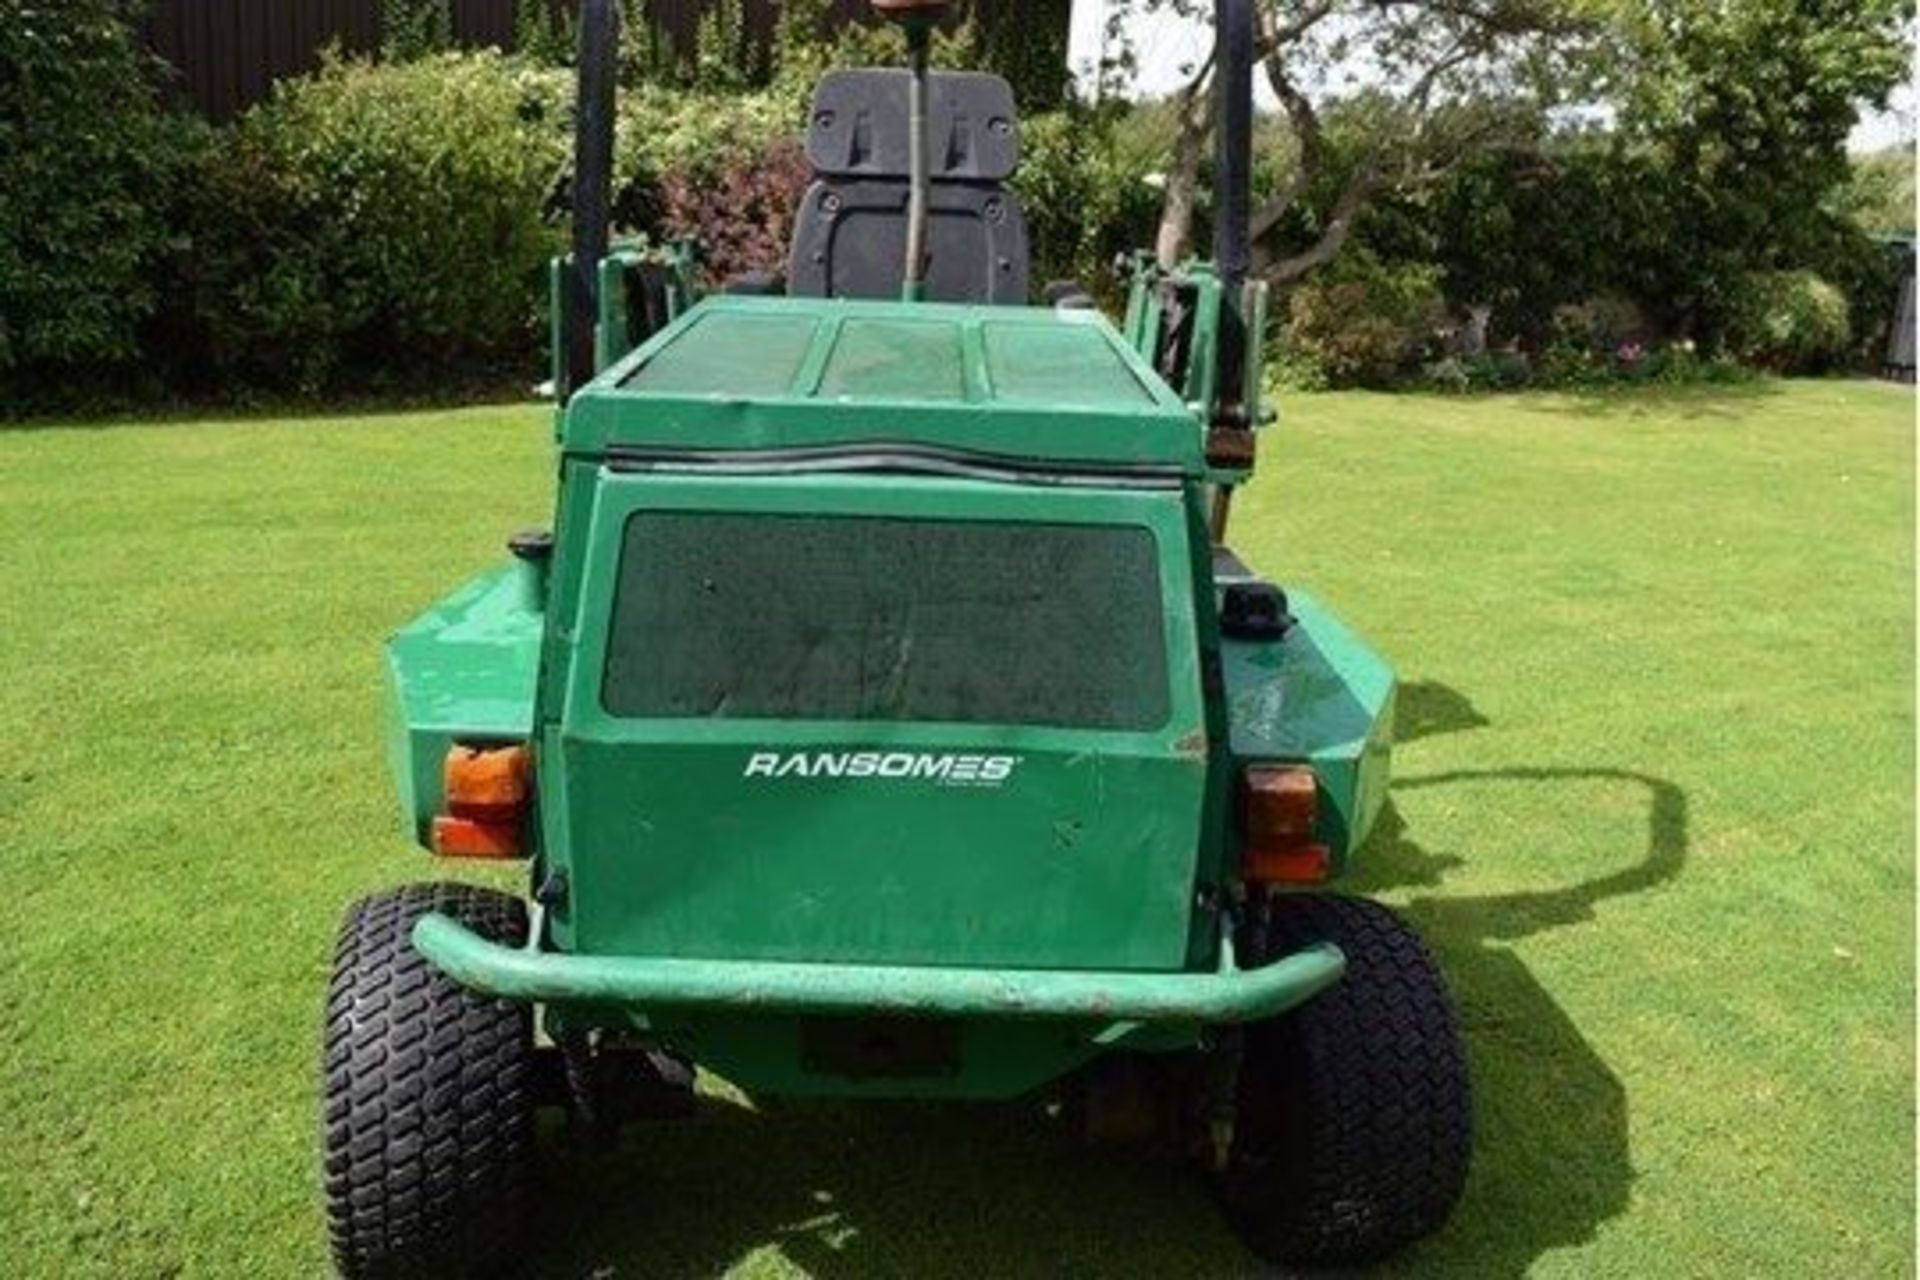 2003 Ransomes Parkway 2250 Plus Ride On Cylinder Mower - Image 3 of 7